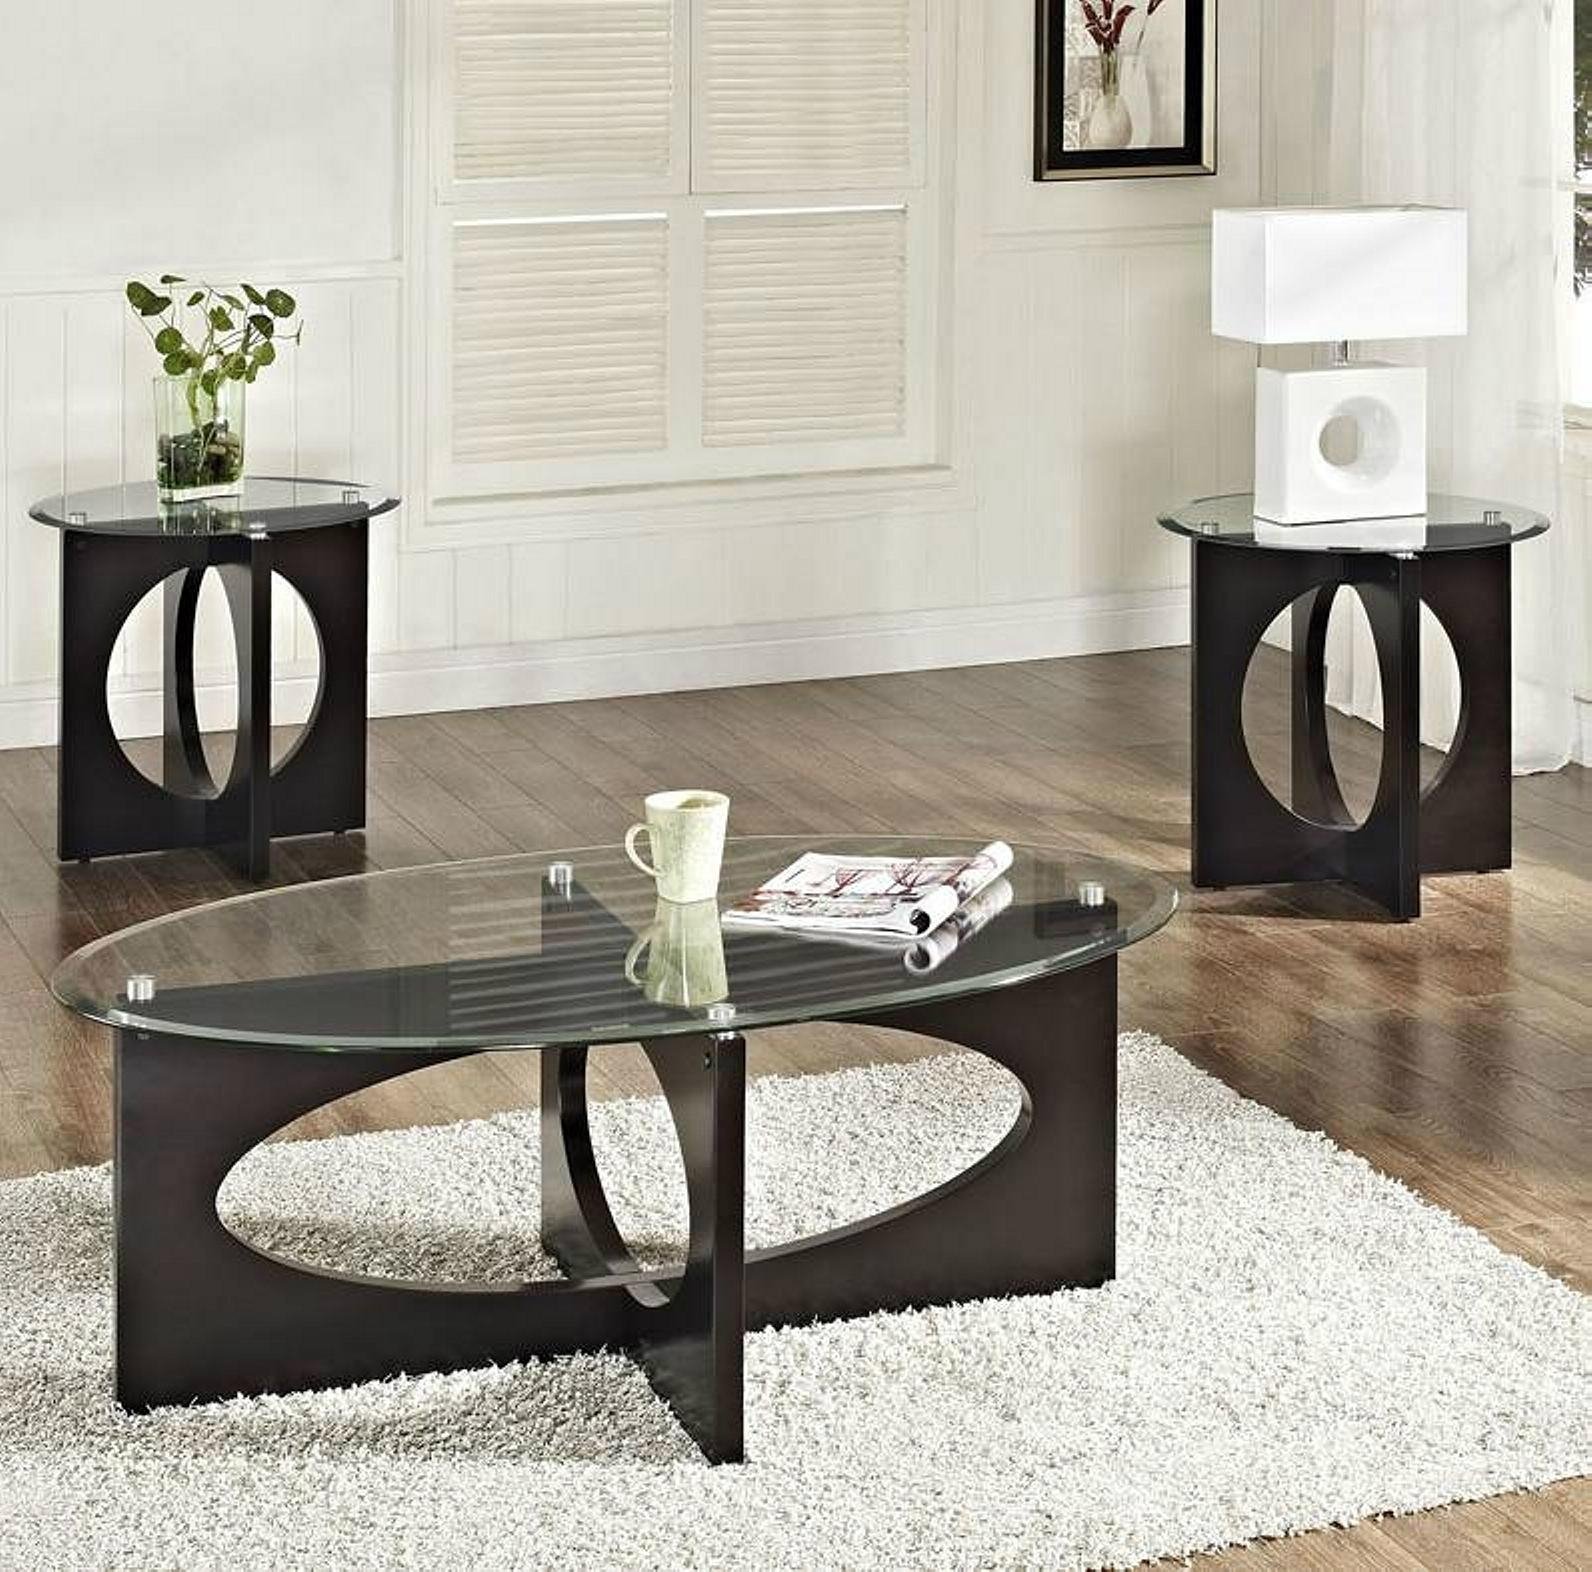 2PCS Wooden Hollow Core Oval And Round Black Glass Coffee Table 2